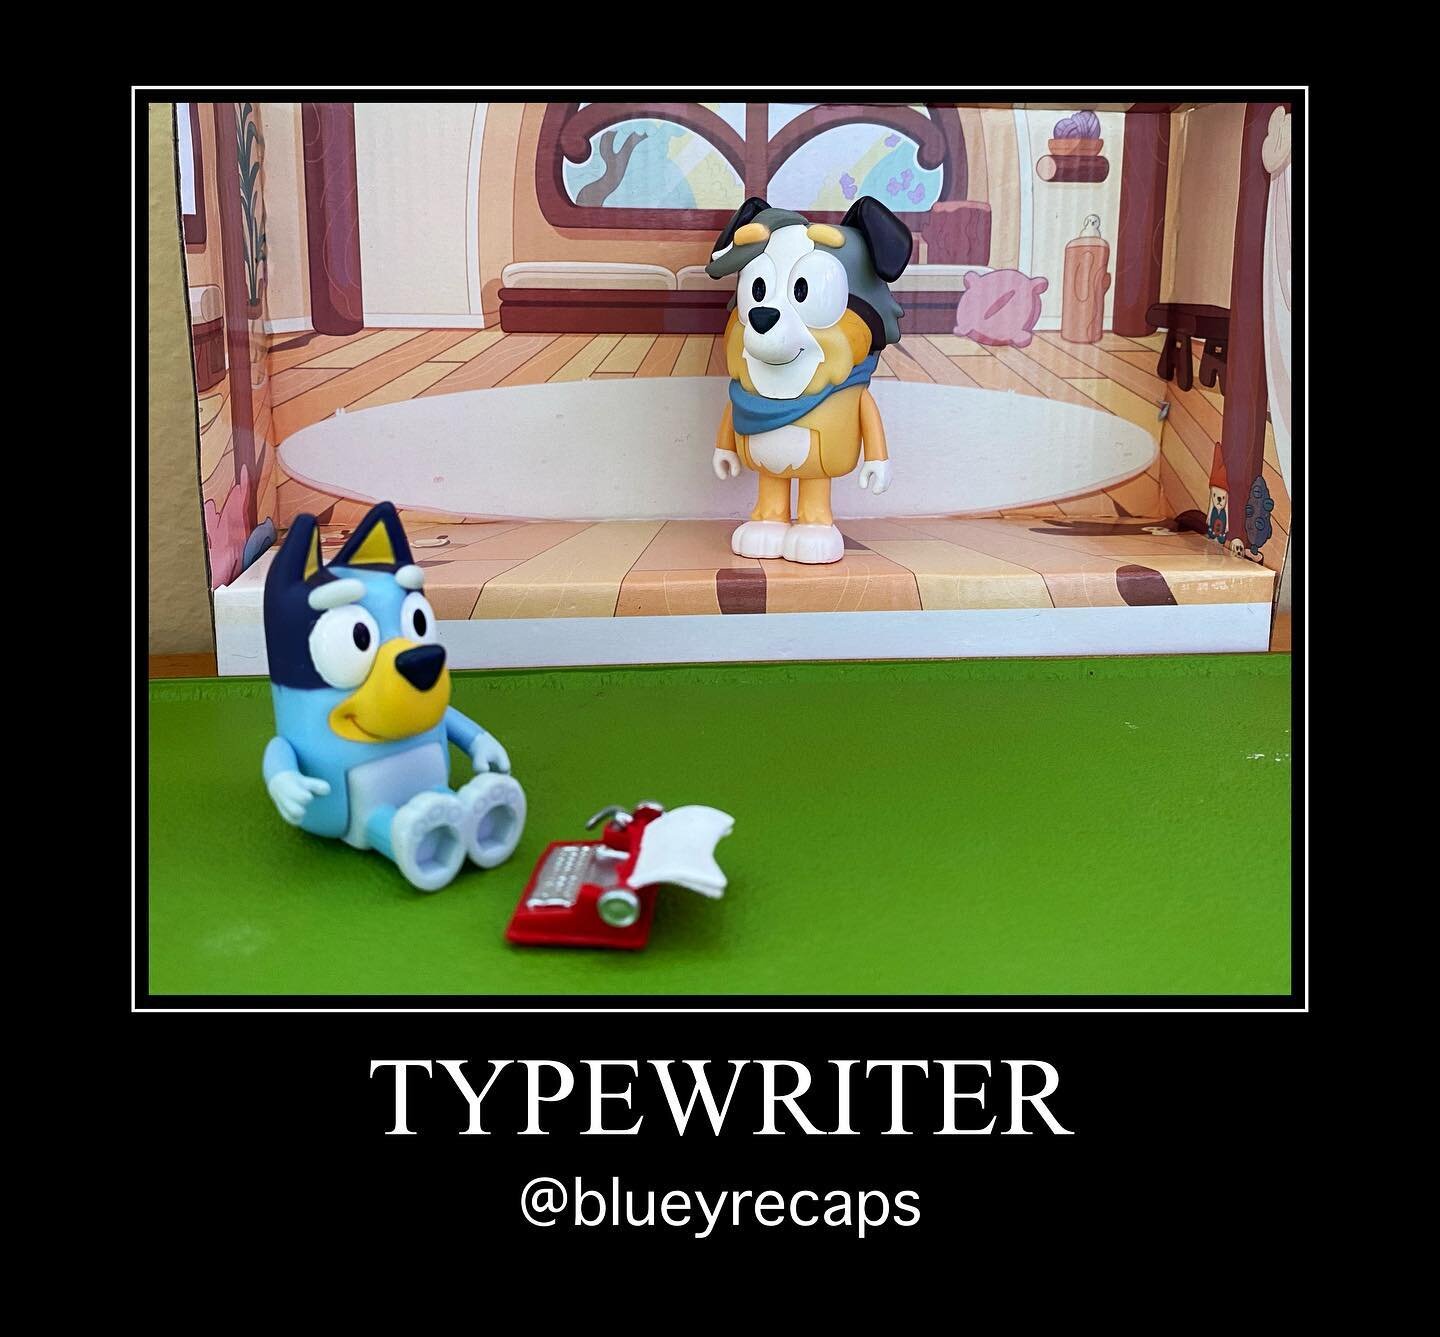 Bluey Recap: Typewriter (#2.35)
#bestbits: Calypso being the calm and ethereal teacher we all wish we were
#lifelesson: don&rsquo;t be a (personal) space invader, and all you need is imagination
.
This episode is set at Bluey&rsquo;s Steiner Kindy. S